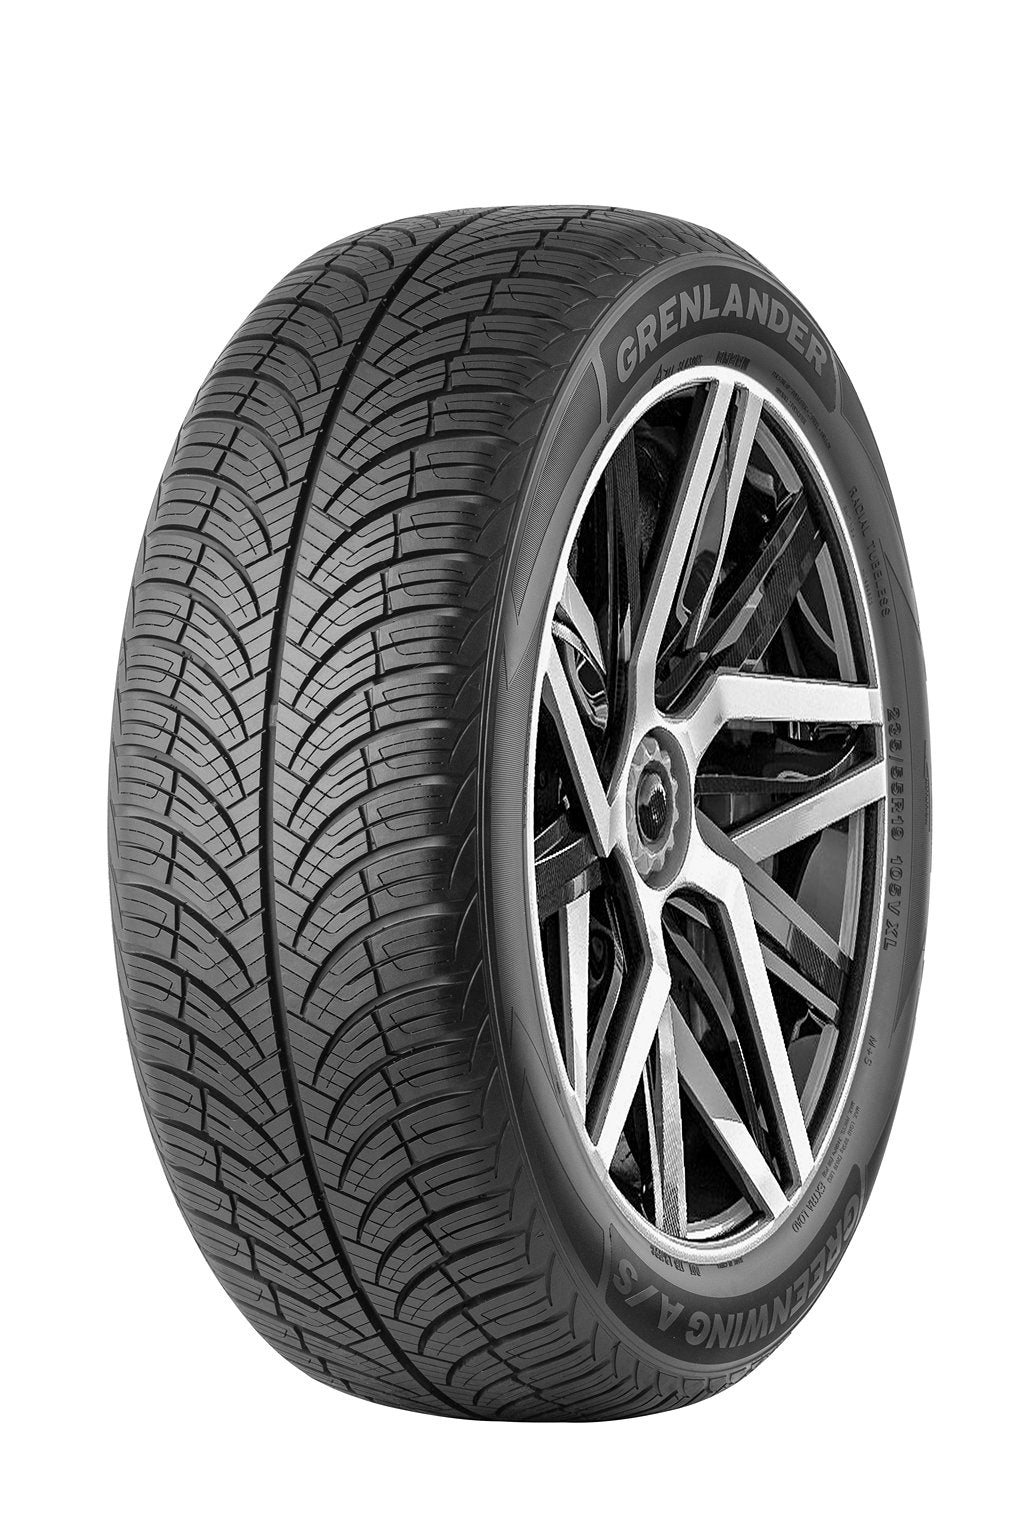 185/65R15 GRENLANDER GREENWING A/S ALL WEATHER - Toee Tire